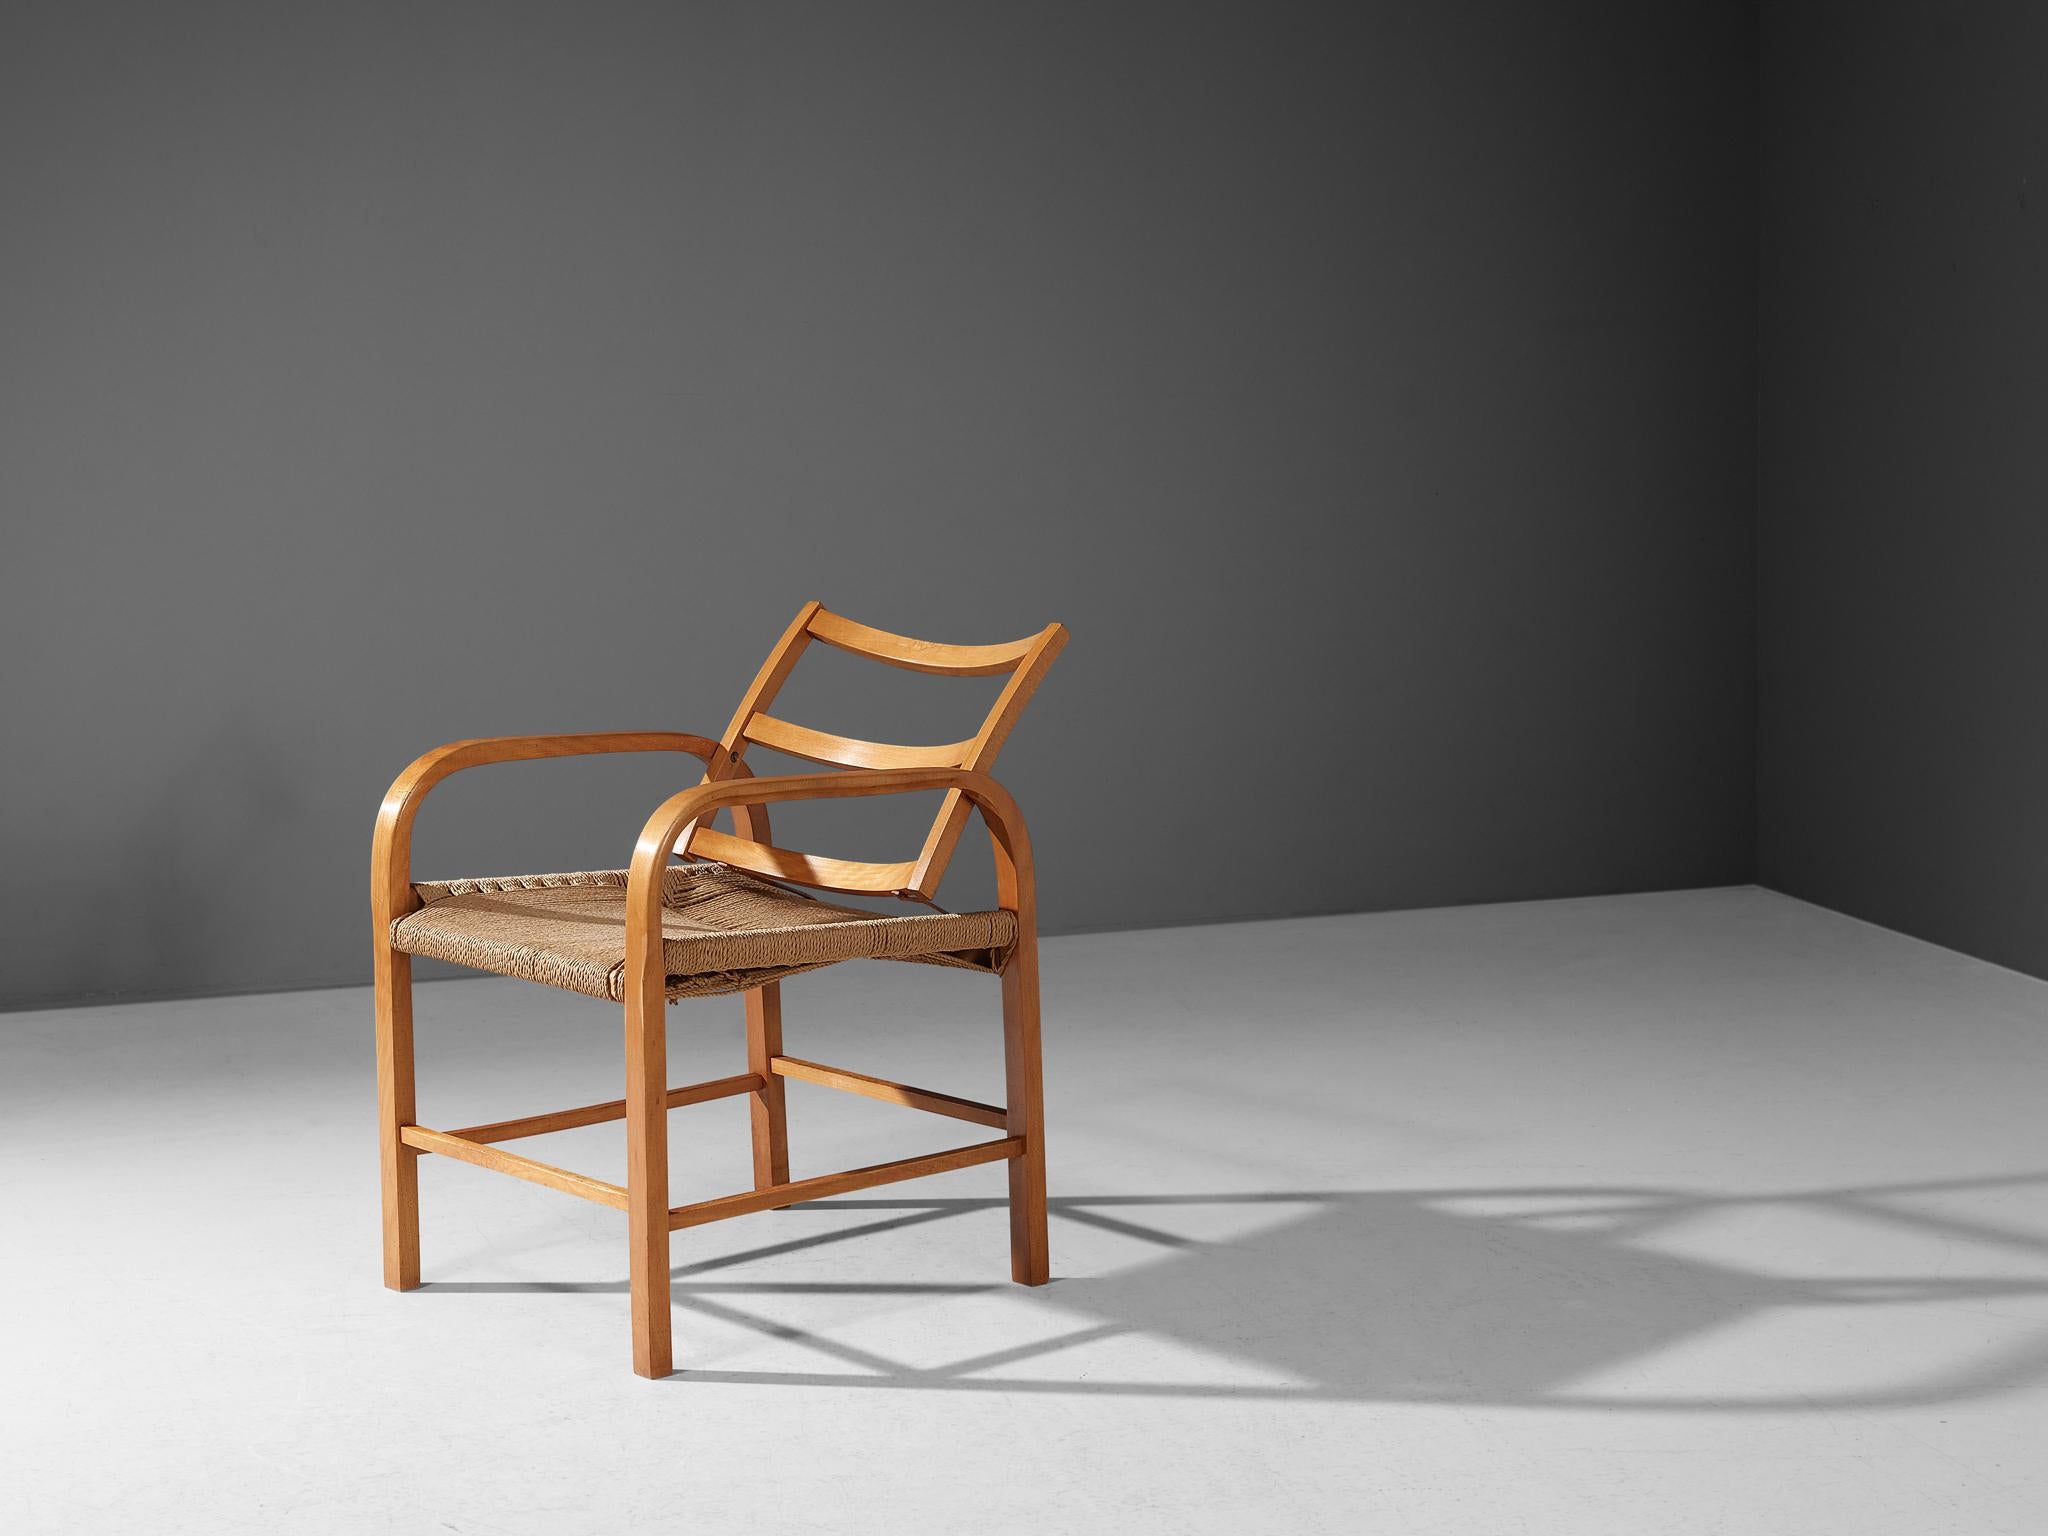 Magnus Stephensen for Cabinet maker Clausen, armchair, beech, woven seaweed, leather, Denmark, circa. 1933

This armchair is designed by Danish architect Magnus Læssøe Stephensen (1903-1984). The designer focused on the creation of a chair that